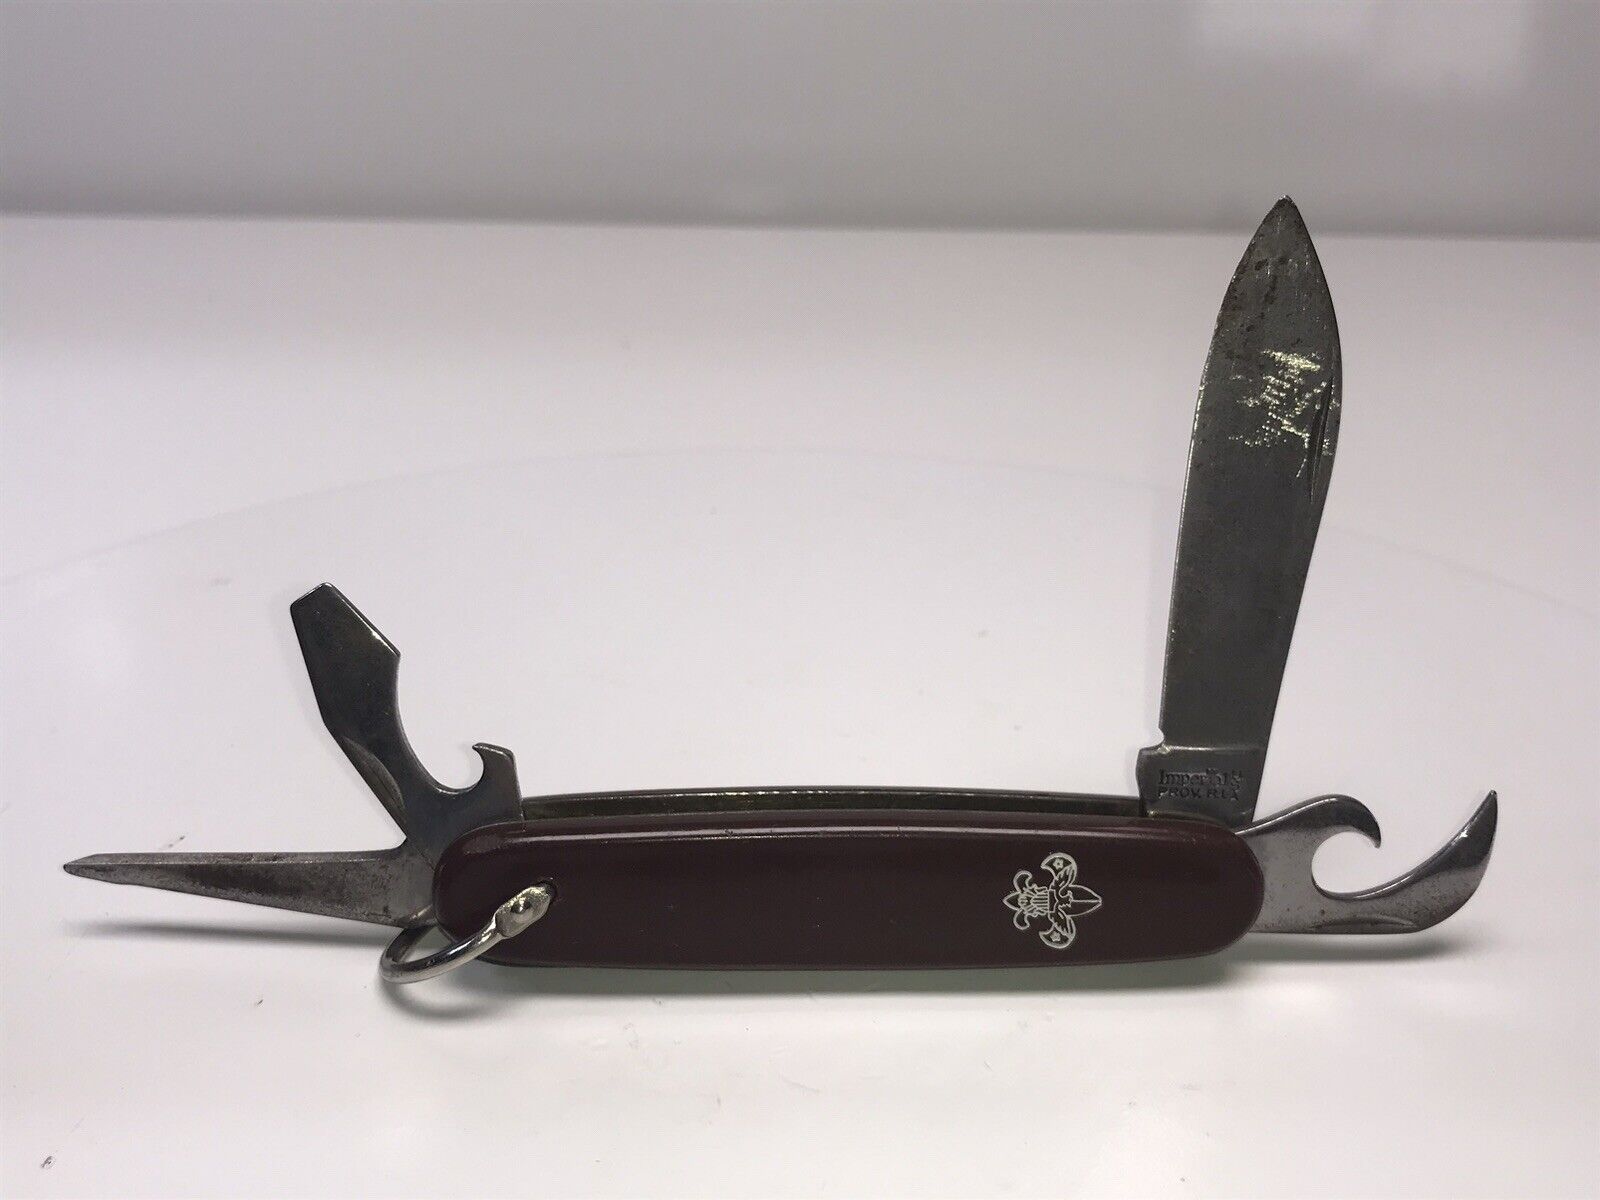 Vintage Official Boy Scouts Of America Pocket/Camp Knife by Imperial Prov. R.I.